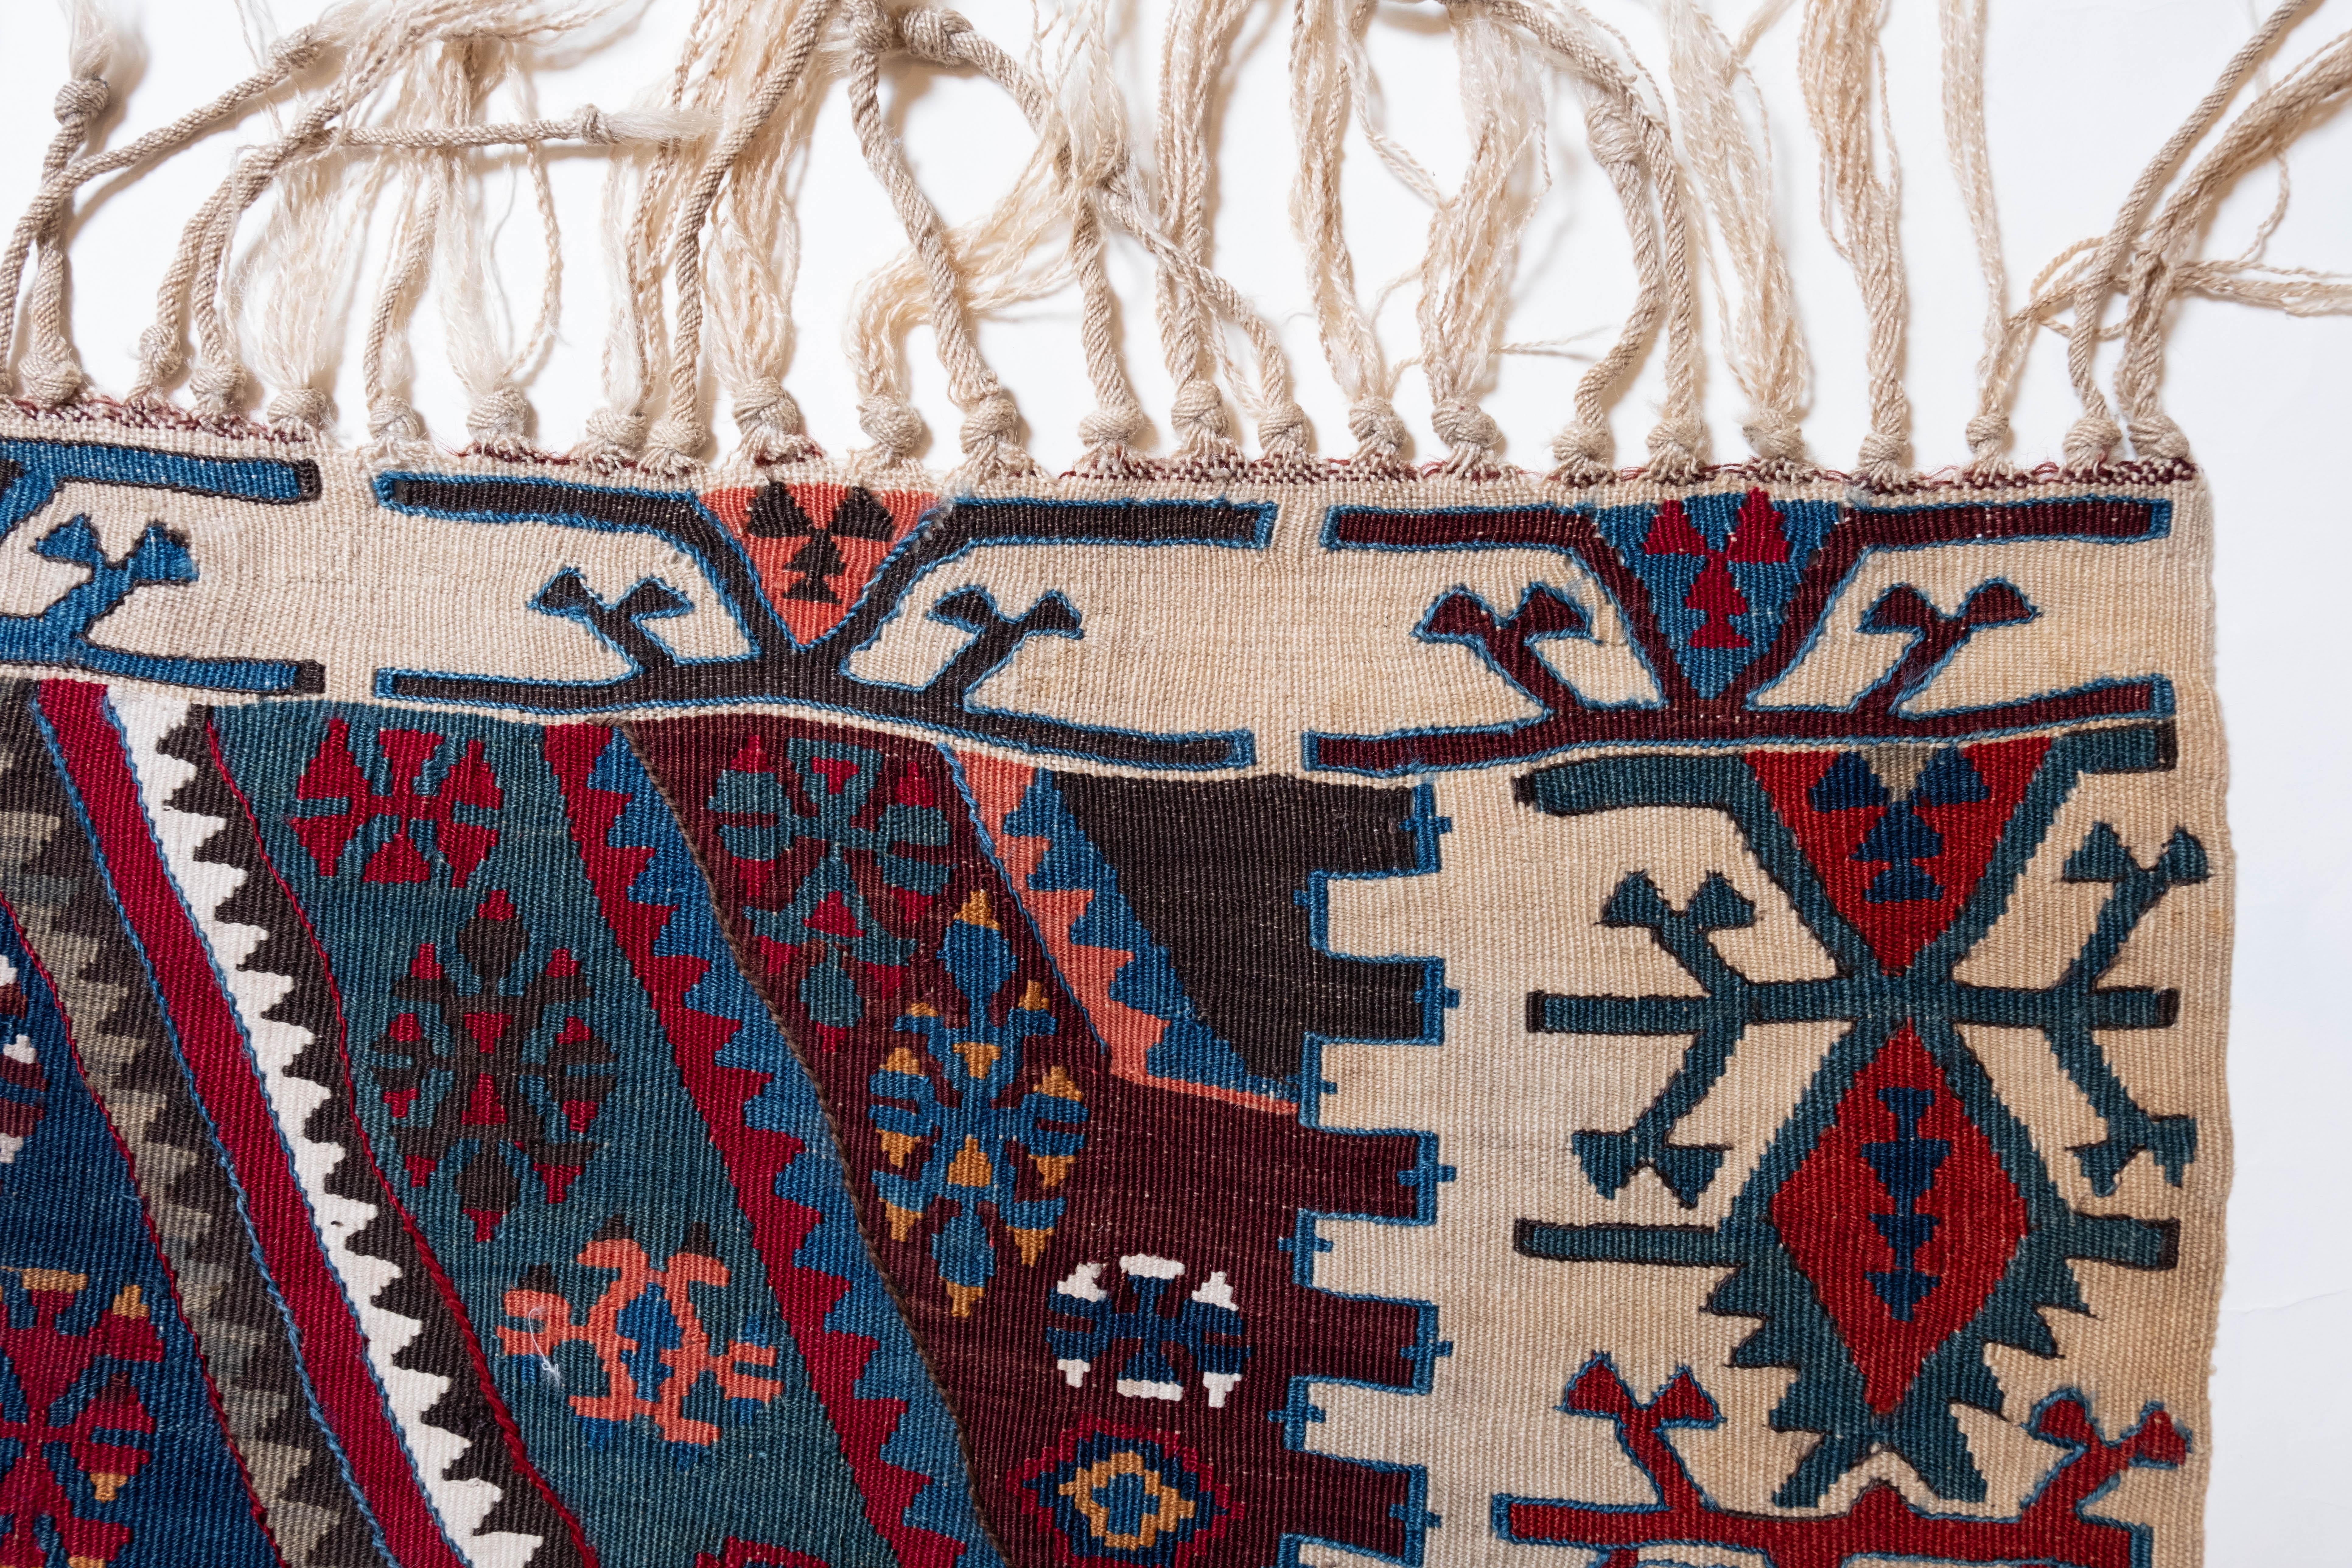 This is an Antique Kilim from the Aleppo region with a rare and beautiful color composition.

This highly collectible antique kilim has wonderful special colors and textures that are typical of an old kilim in good condition. It is a piece that